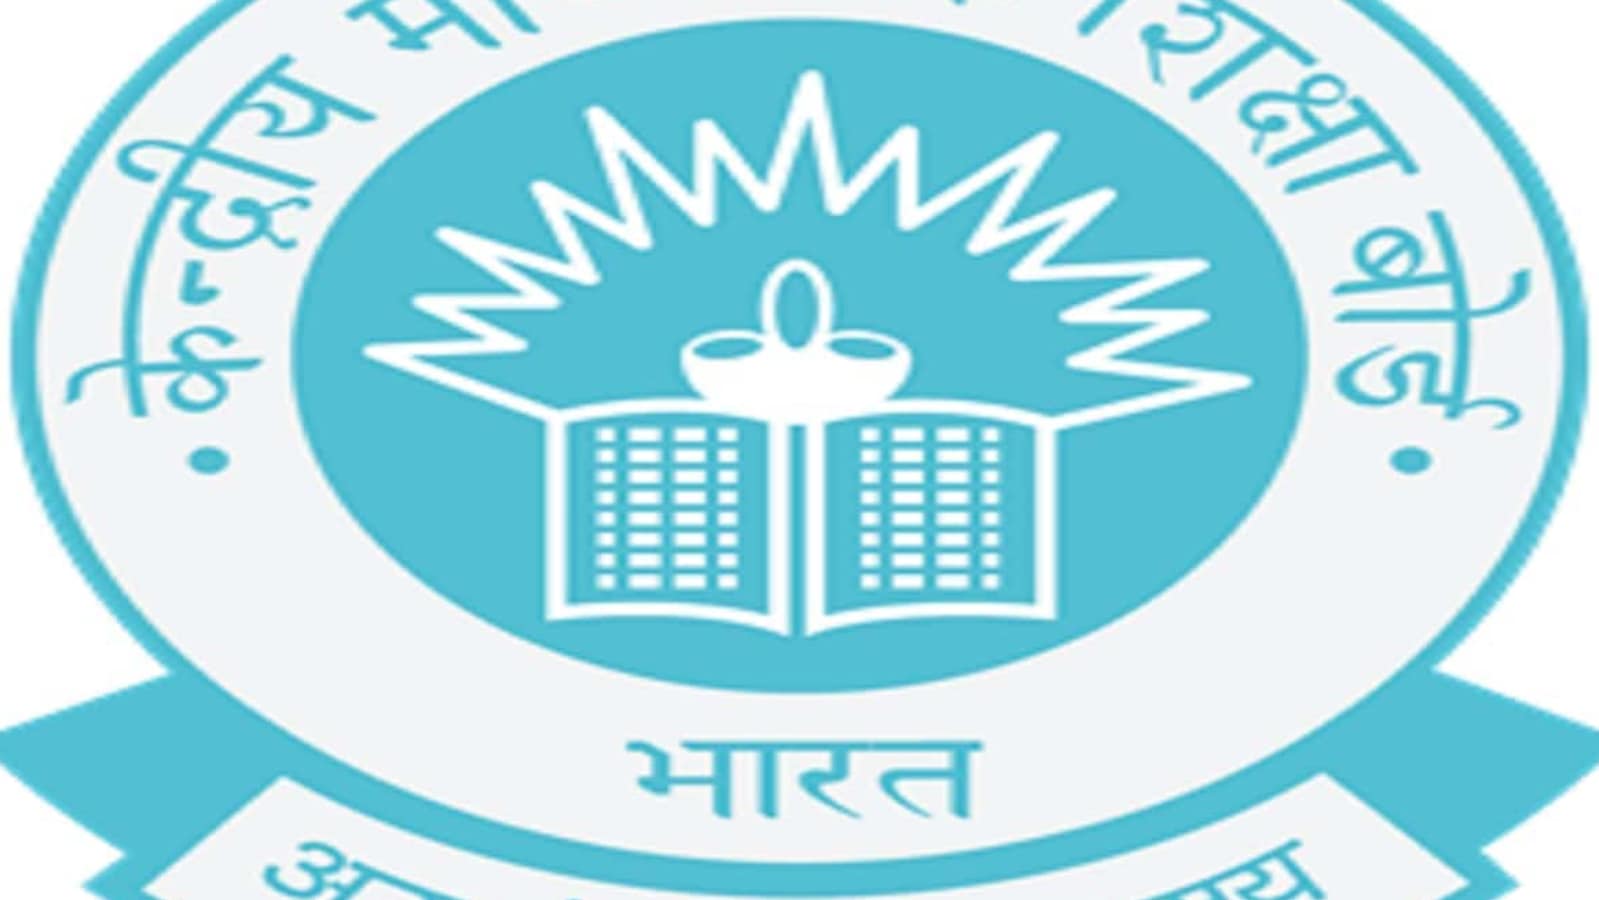 95% plus scores to be exactly similar to reference year: CBSE to schools